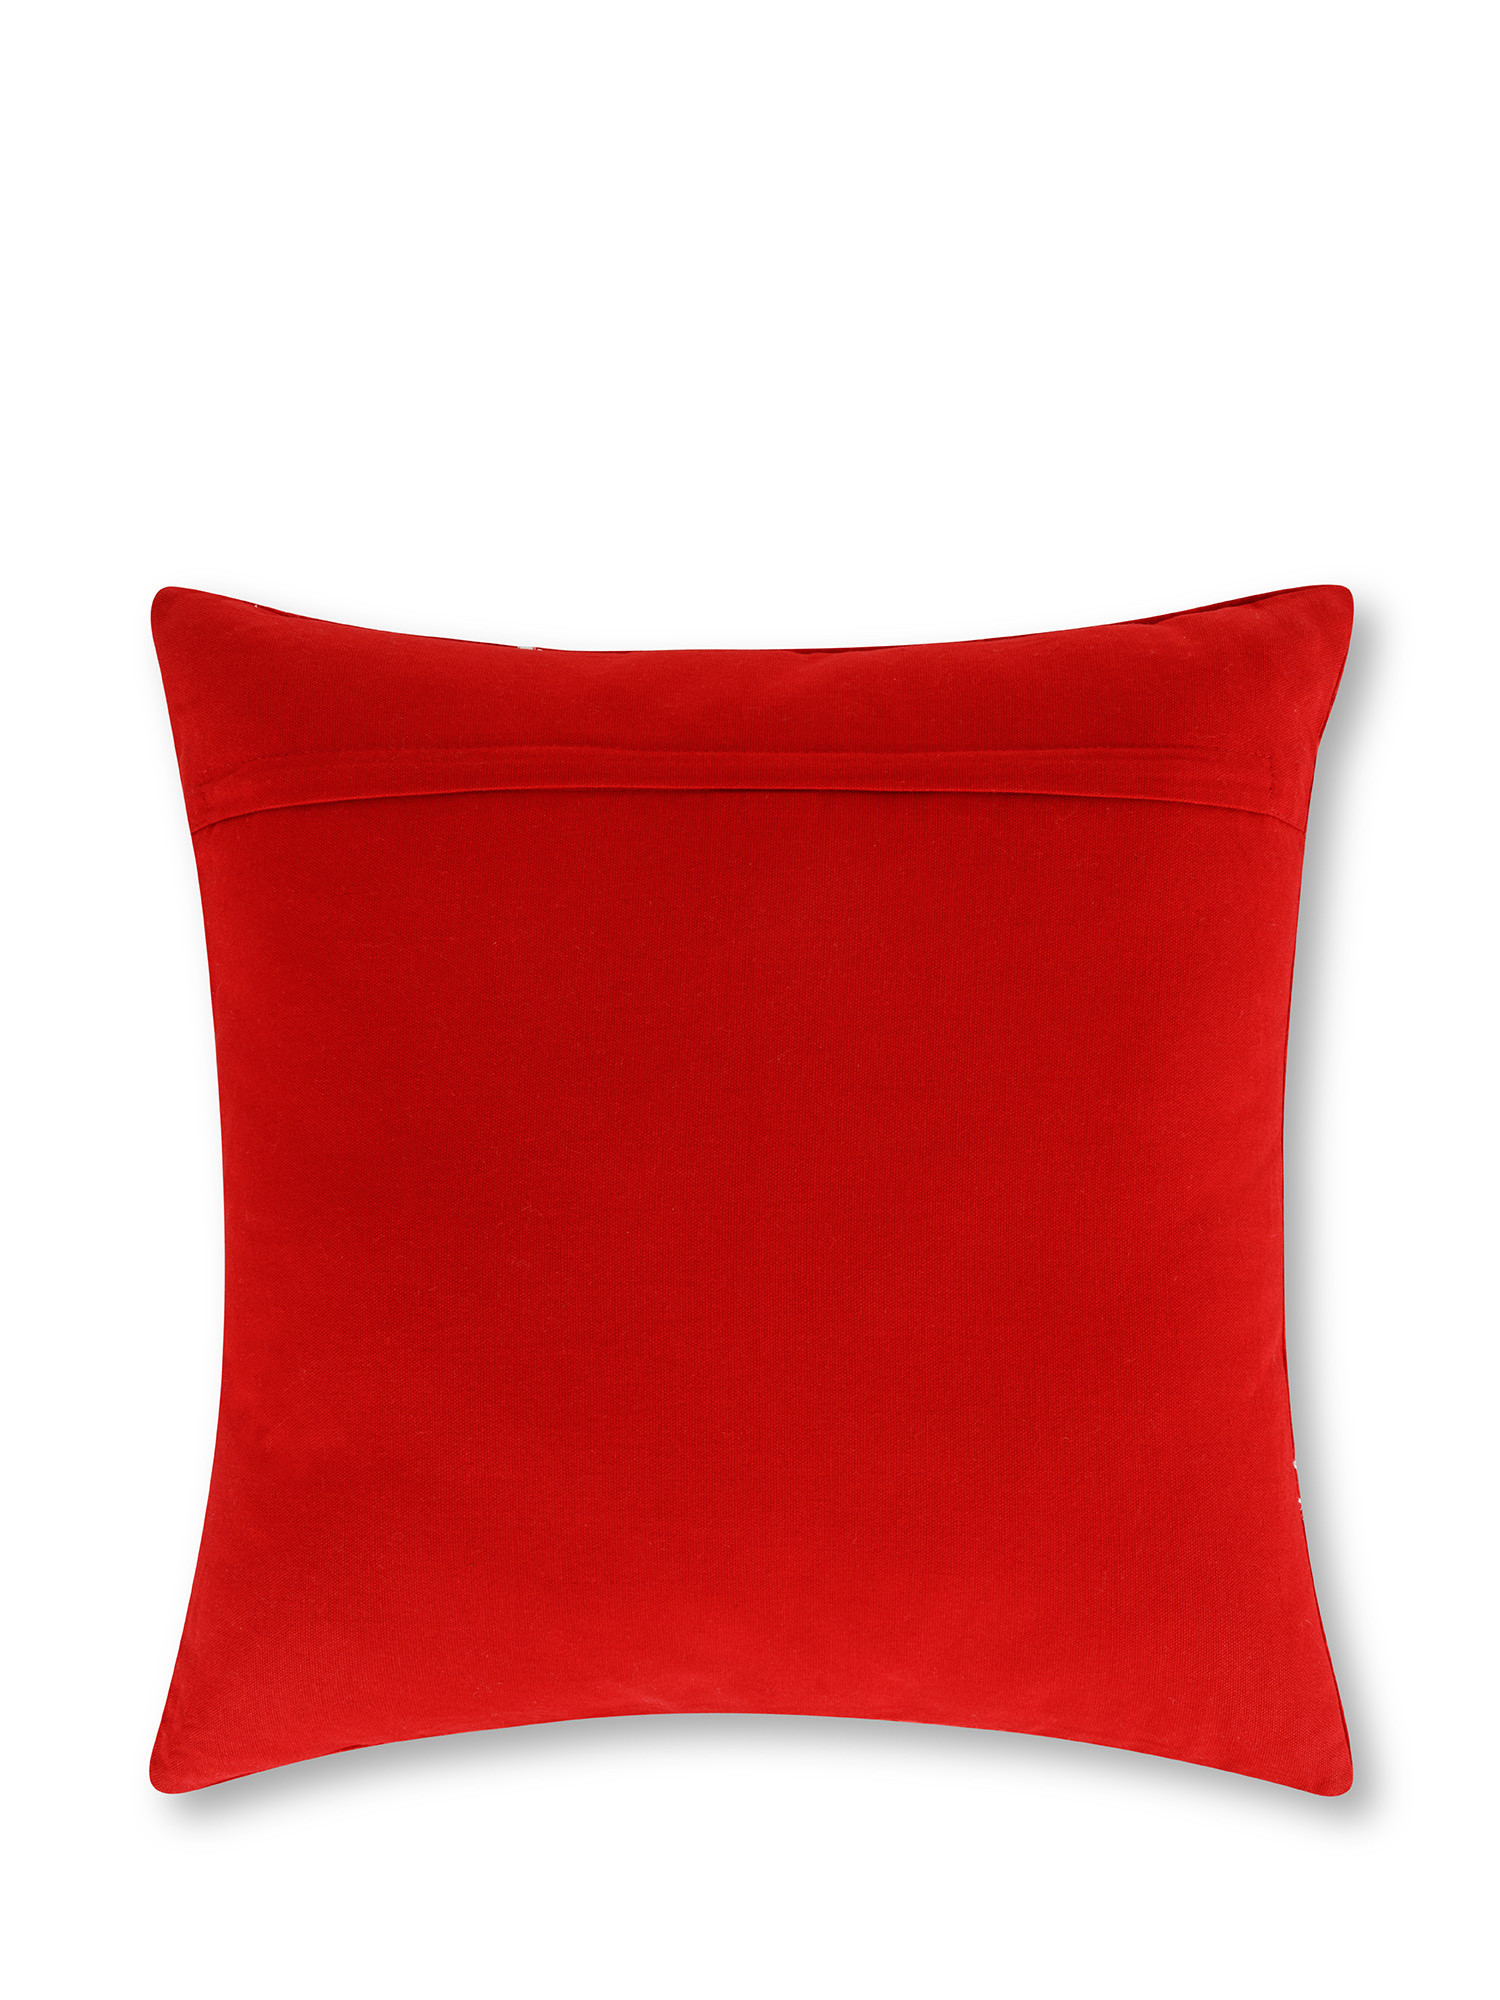 Velvet cushion with embossed stars 45x45 cm, Red, large image number 1